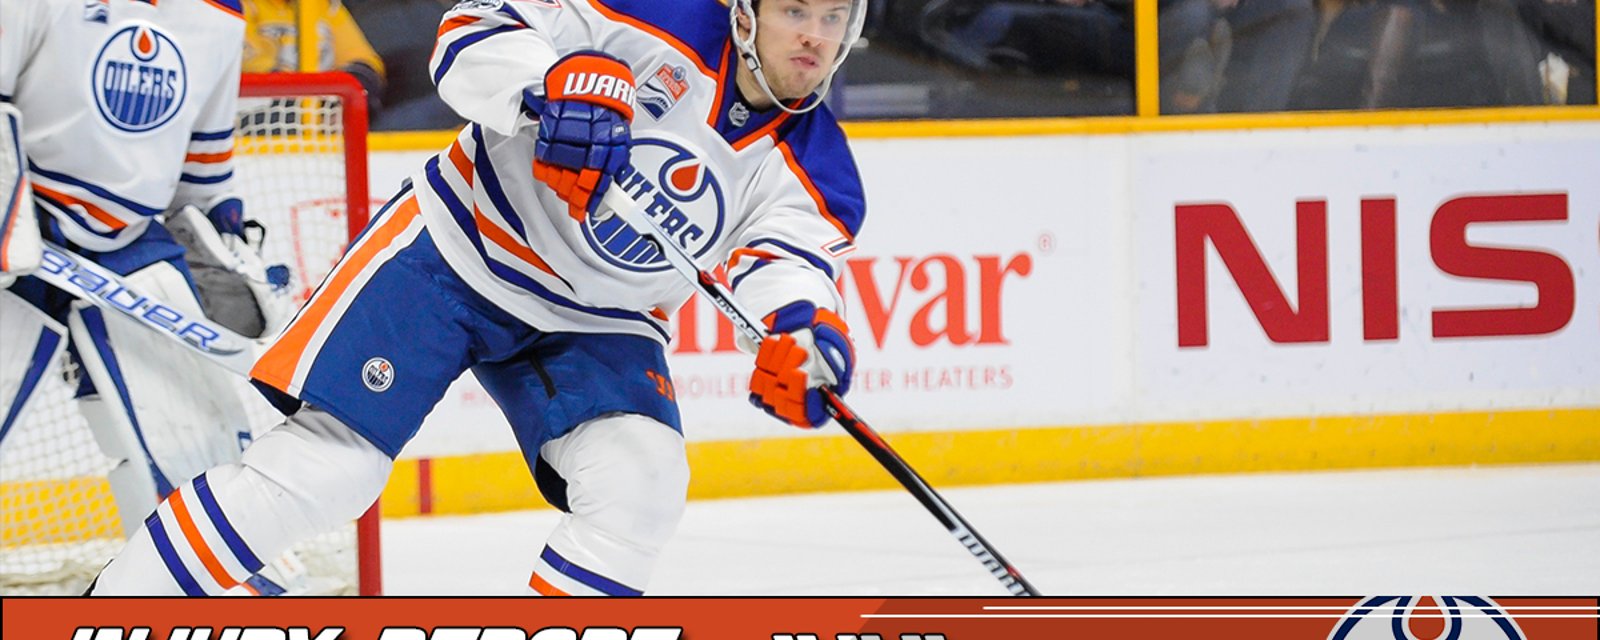 UPDATE: What’s Klefbom’s status for game 7?